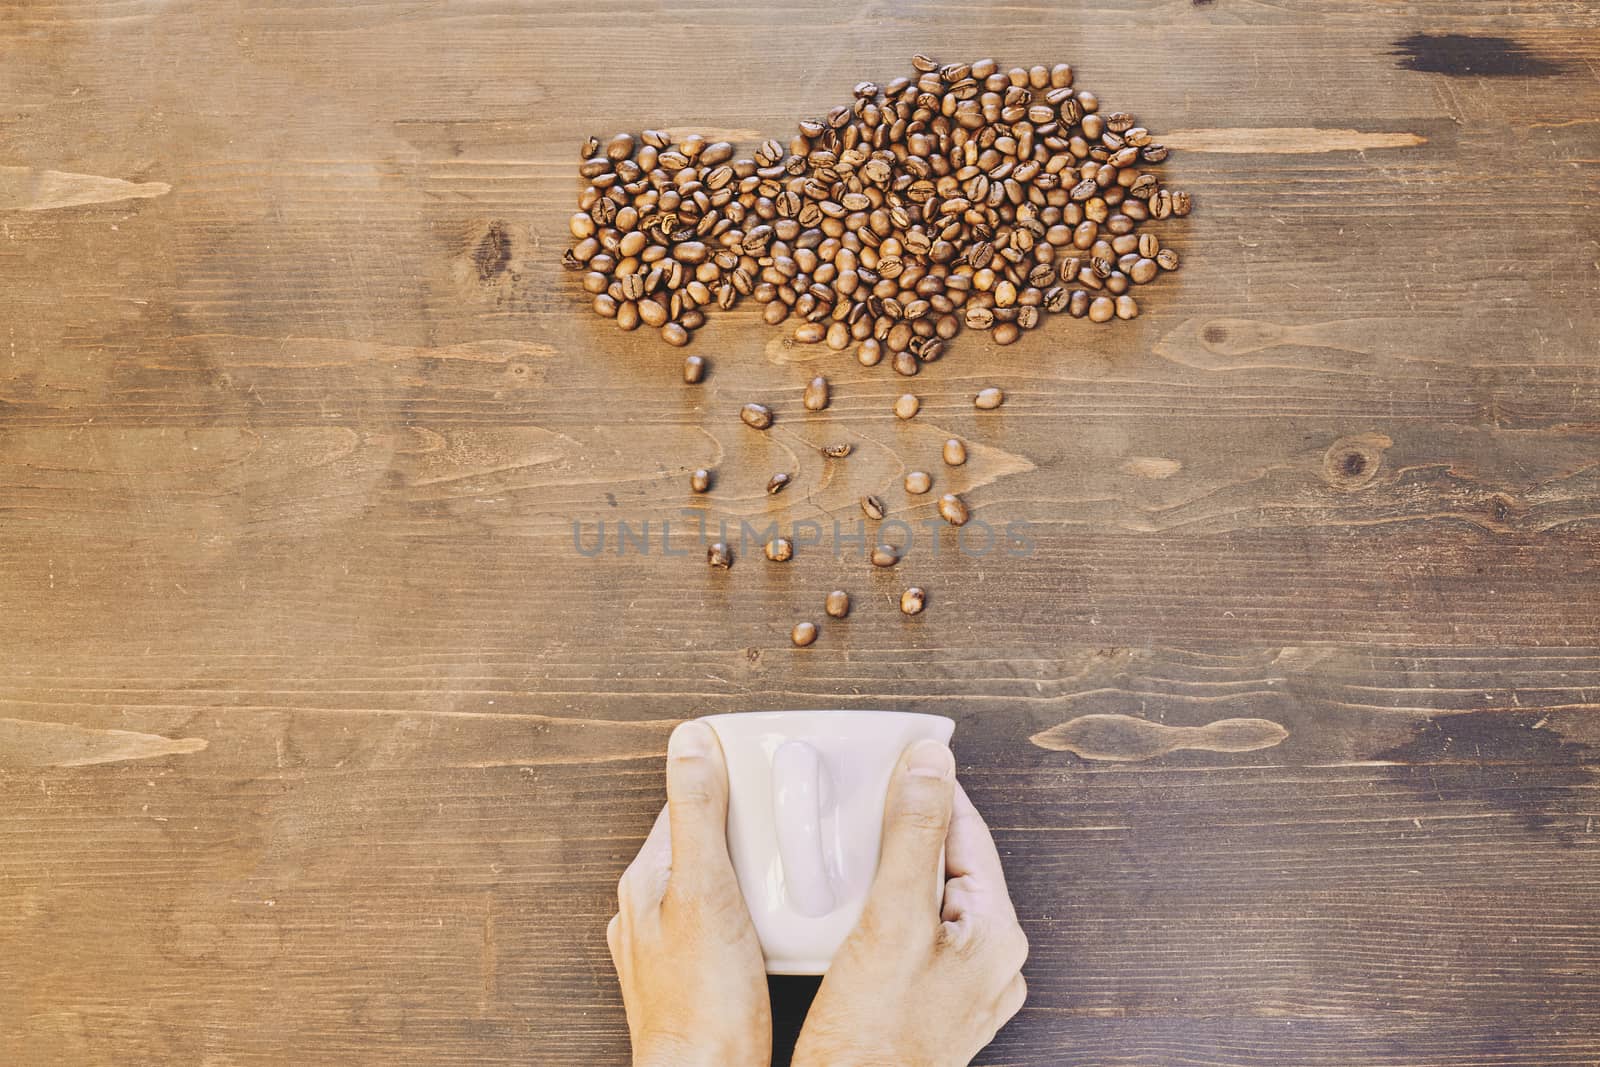 Top view of a person holding a white cup with roasted coffee beans on the table